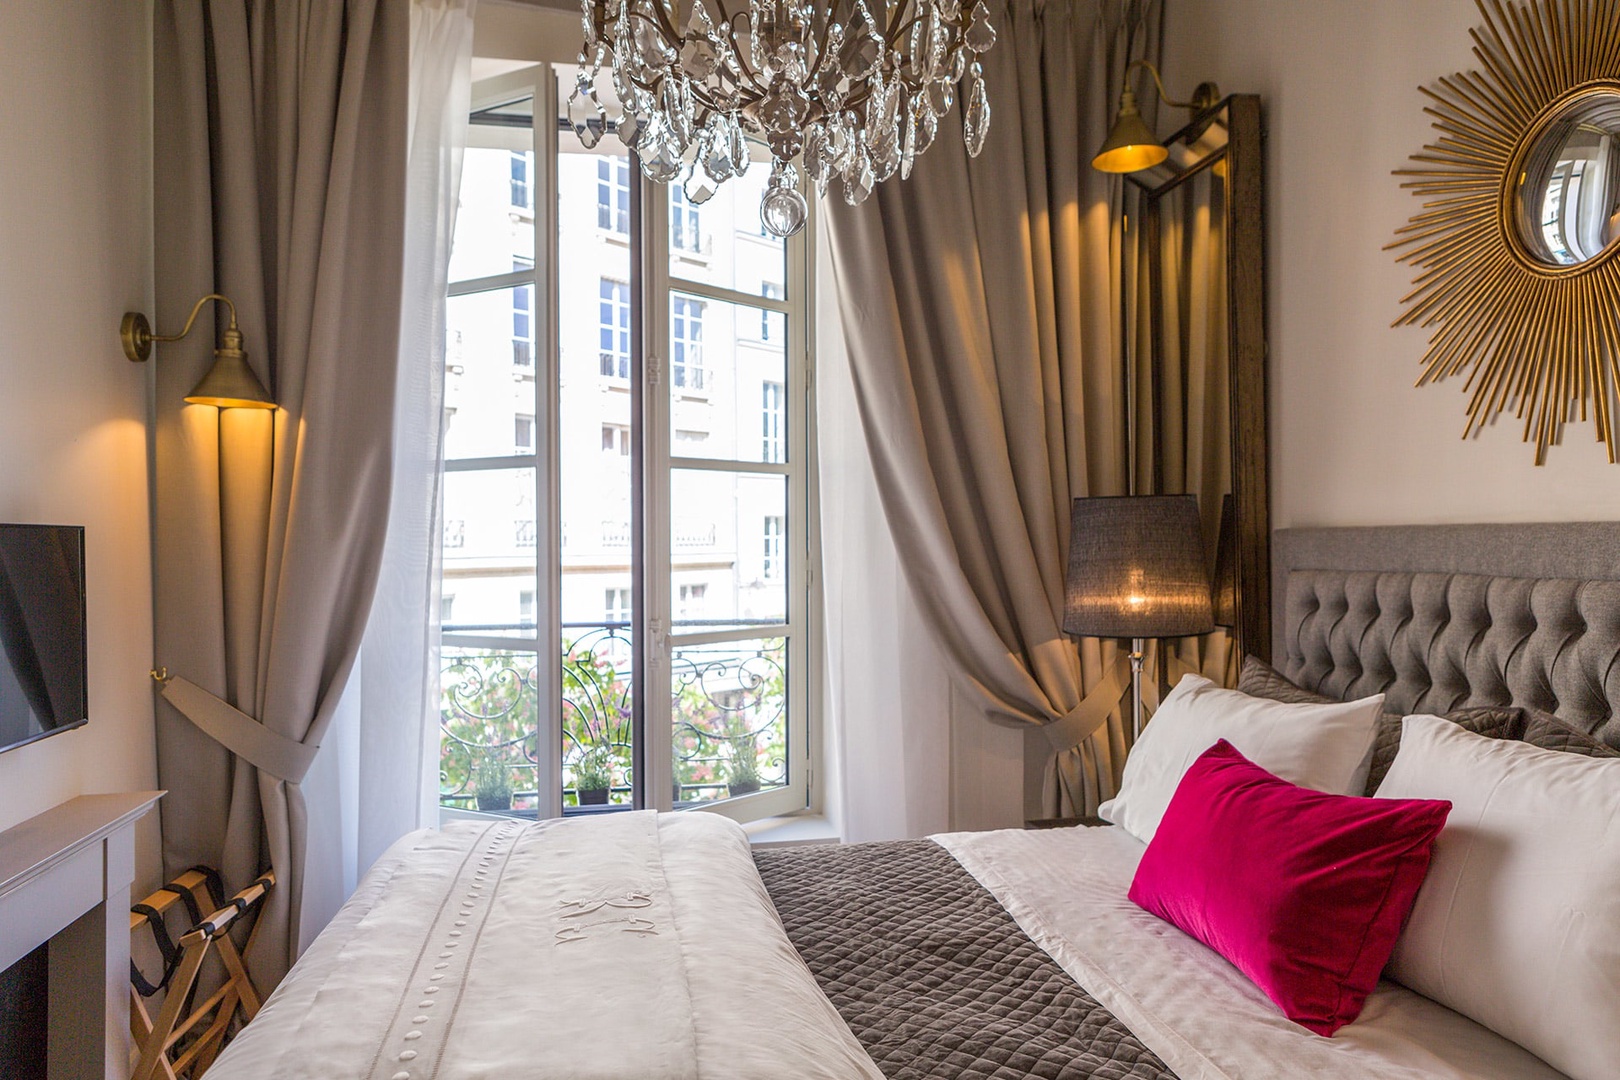 View of the stunning Place Dauphine from the bedroom